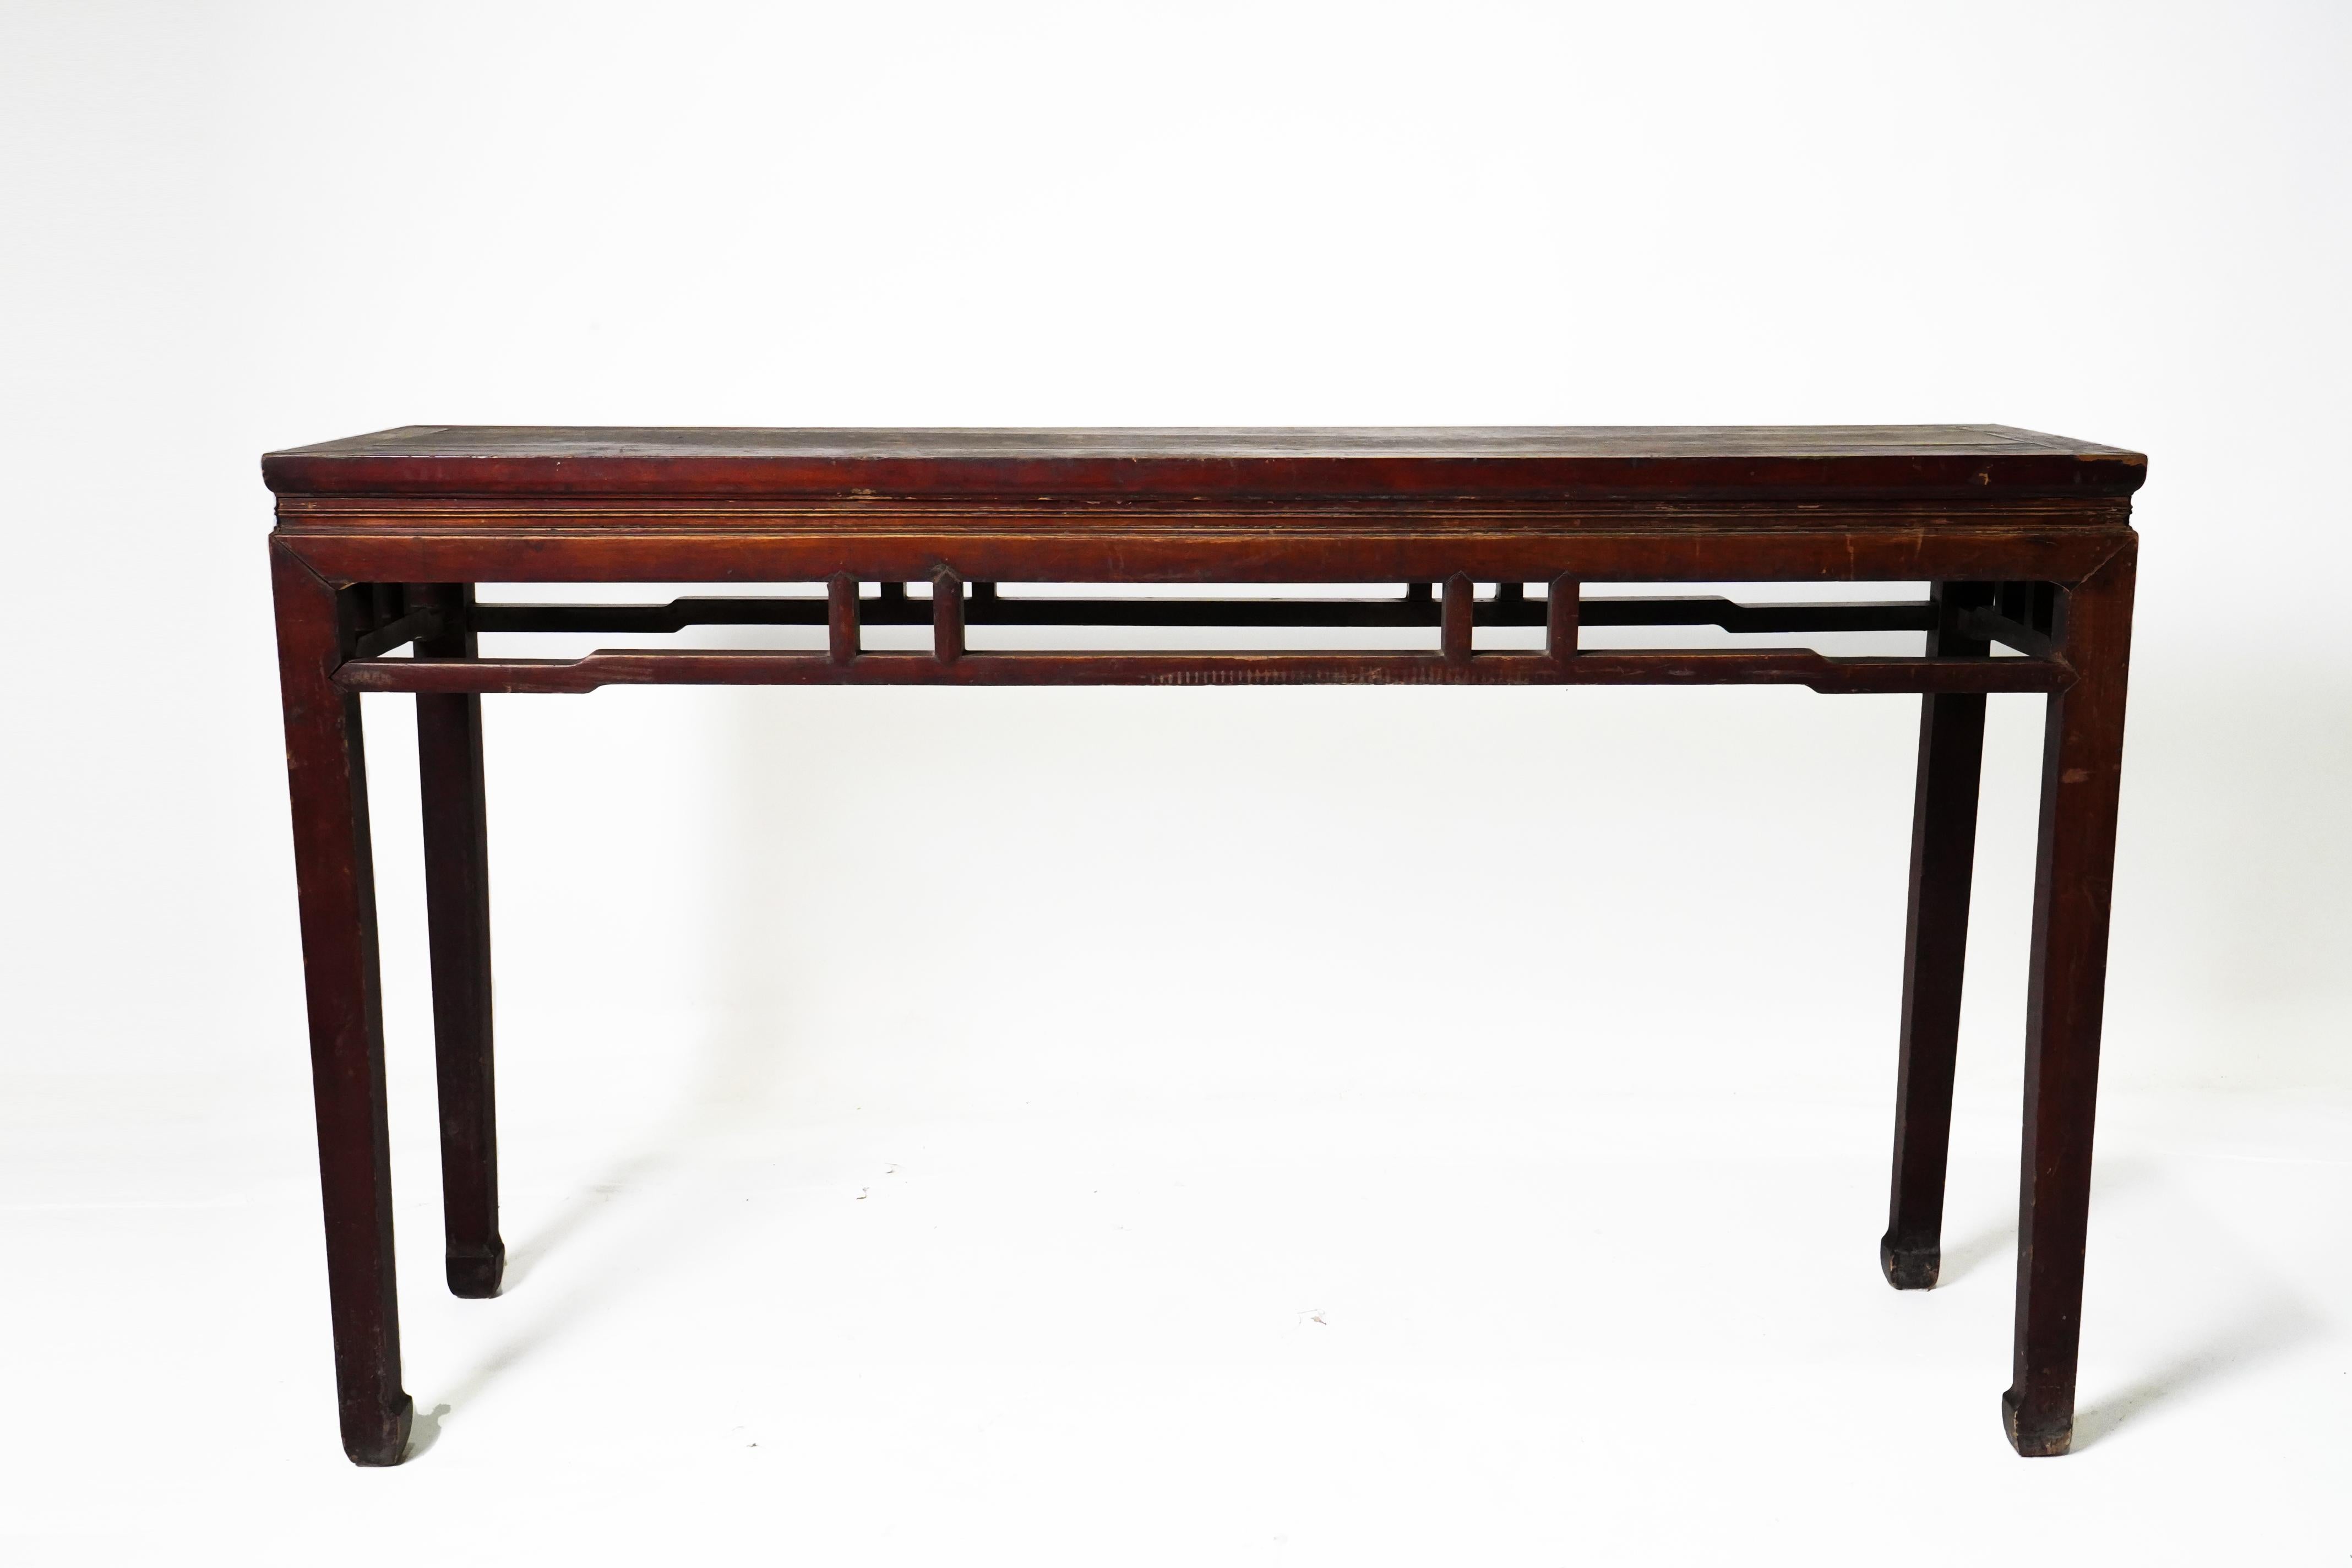 This slim and elegant table was once used to serve wine during festival days and to display objects of beauty and value. It has a floating panel top, a narrow waist and graceful Tang-inspired horse hoof-shaped legs. The bright red oxblood lacquer